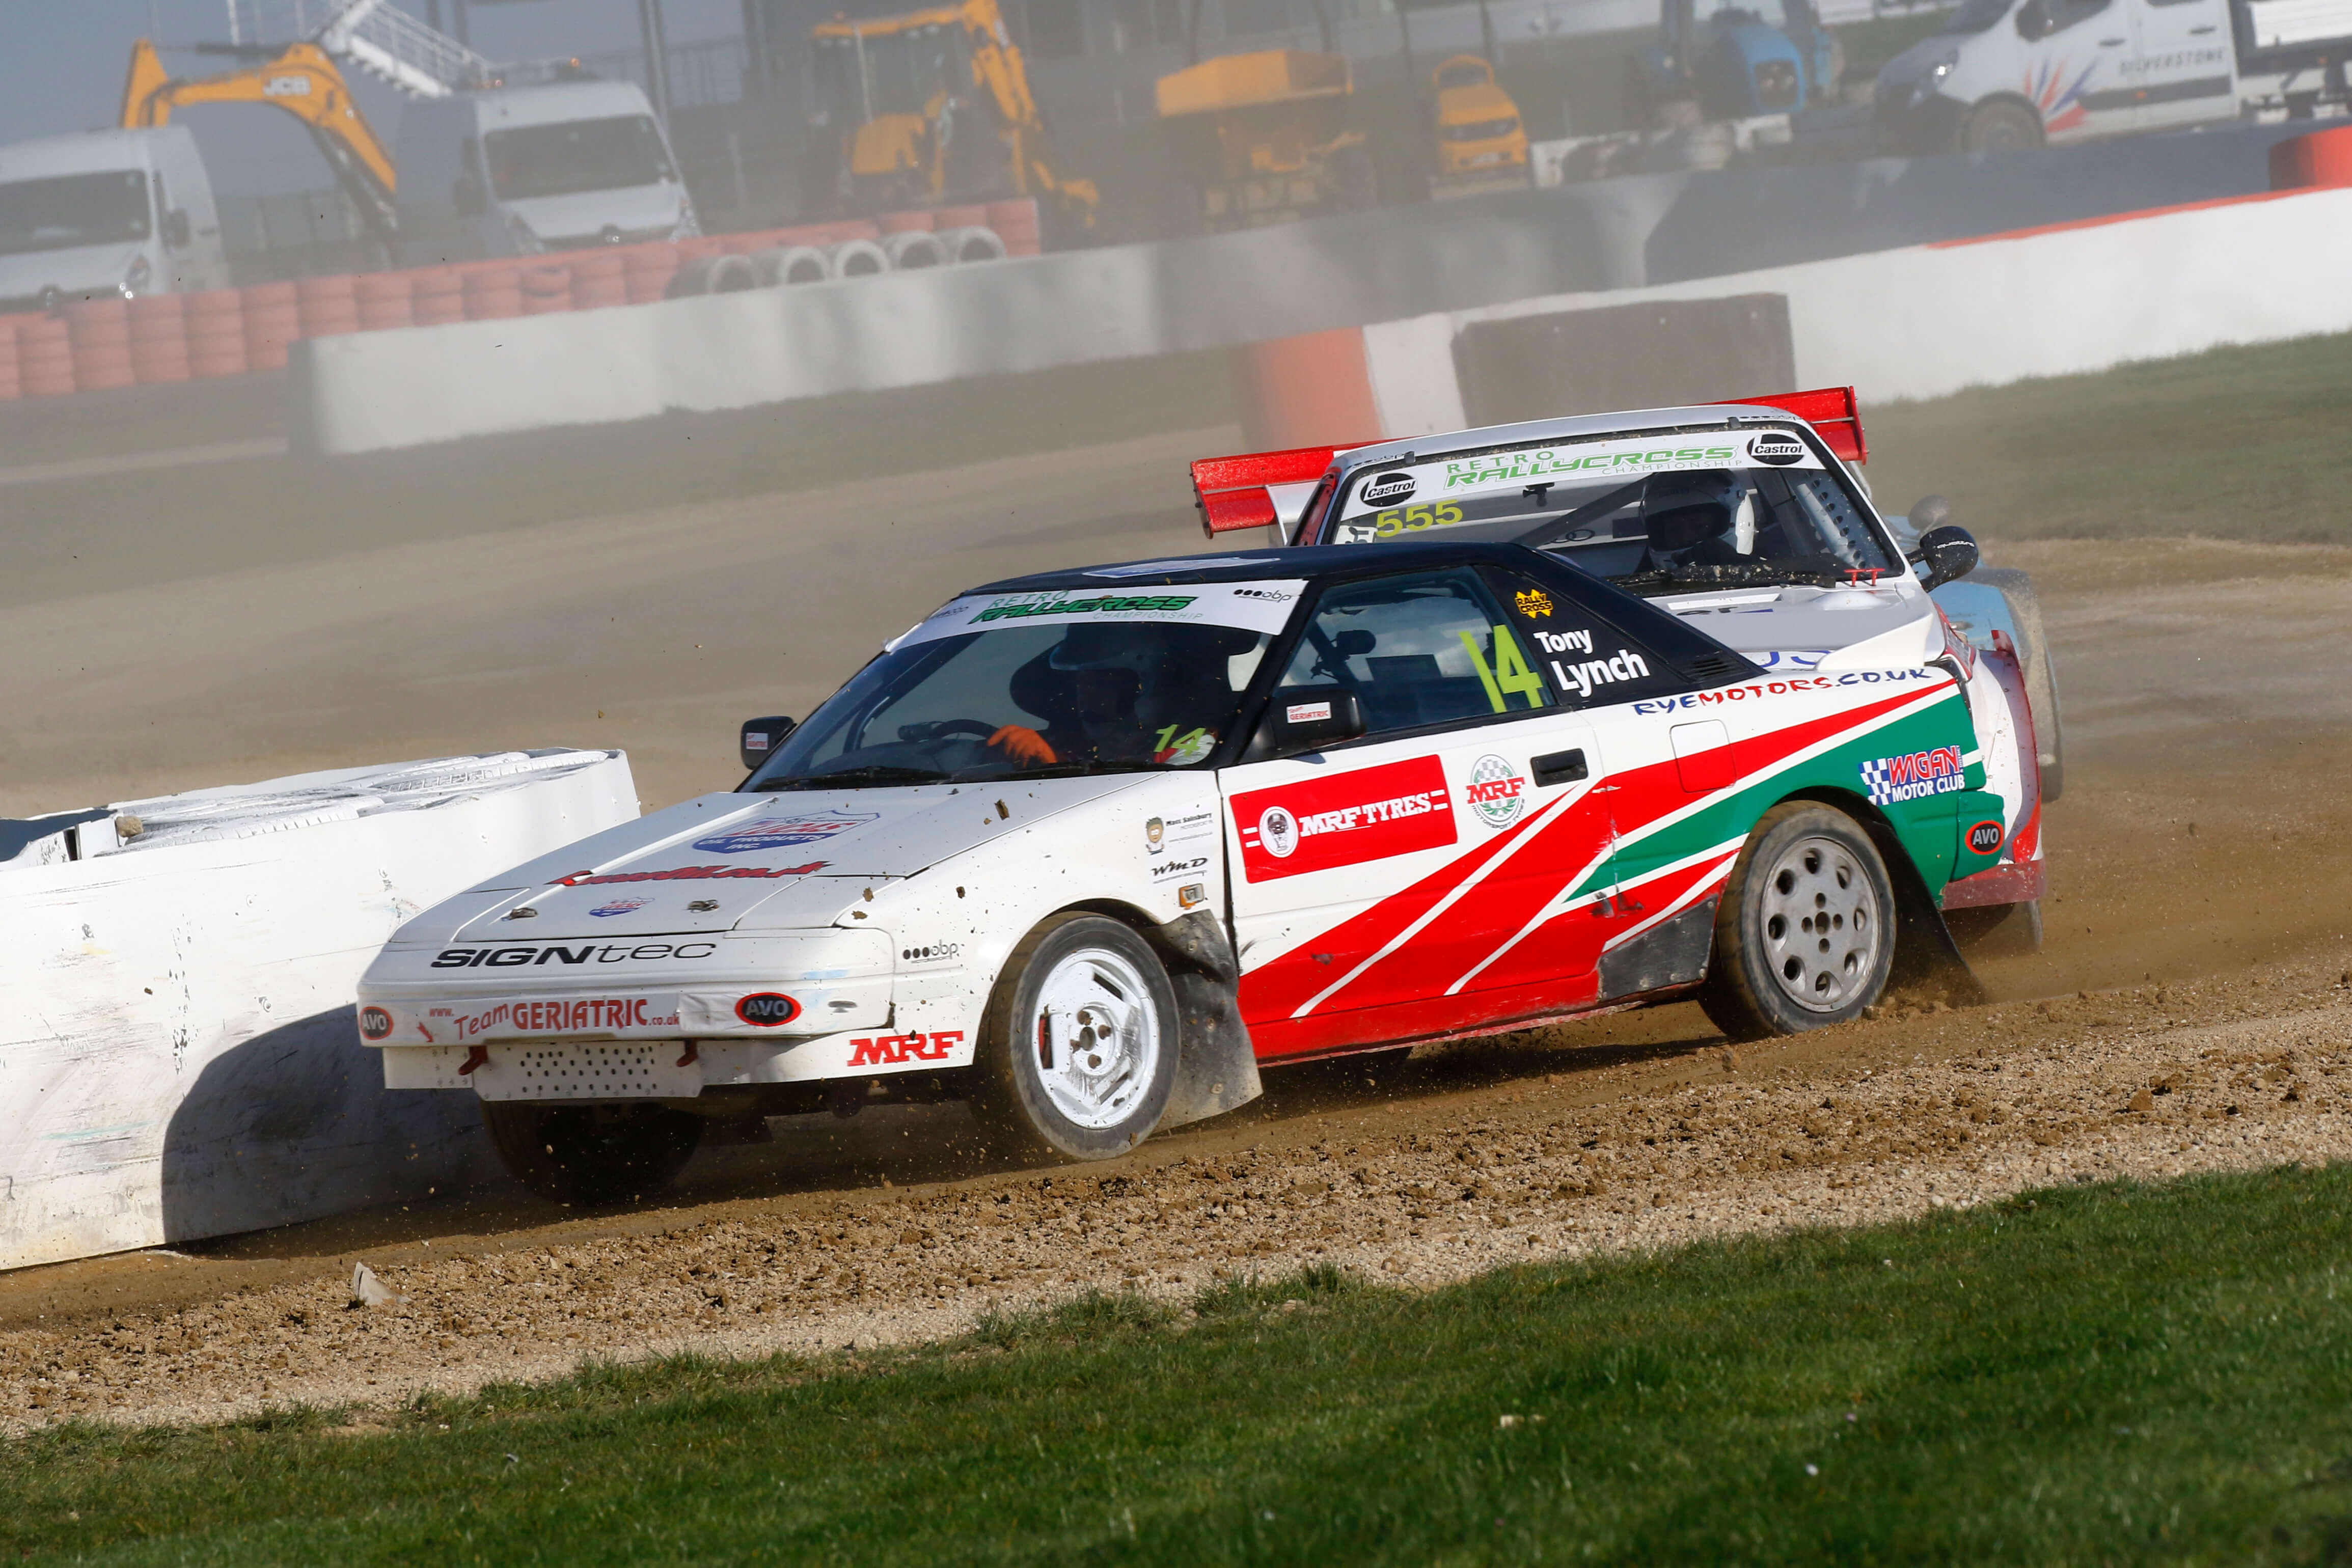 Solid start to Retro life for Tony Lynch at Silverstone